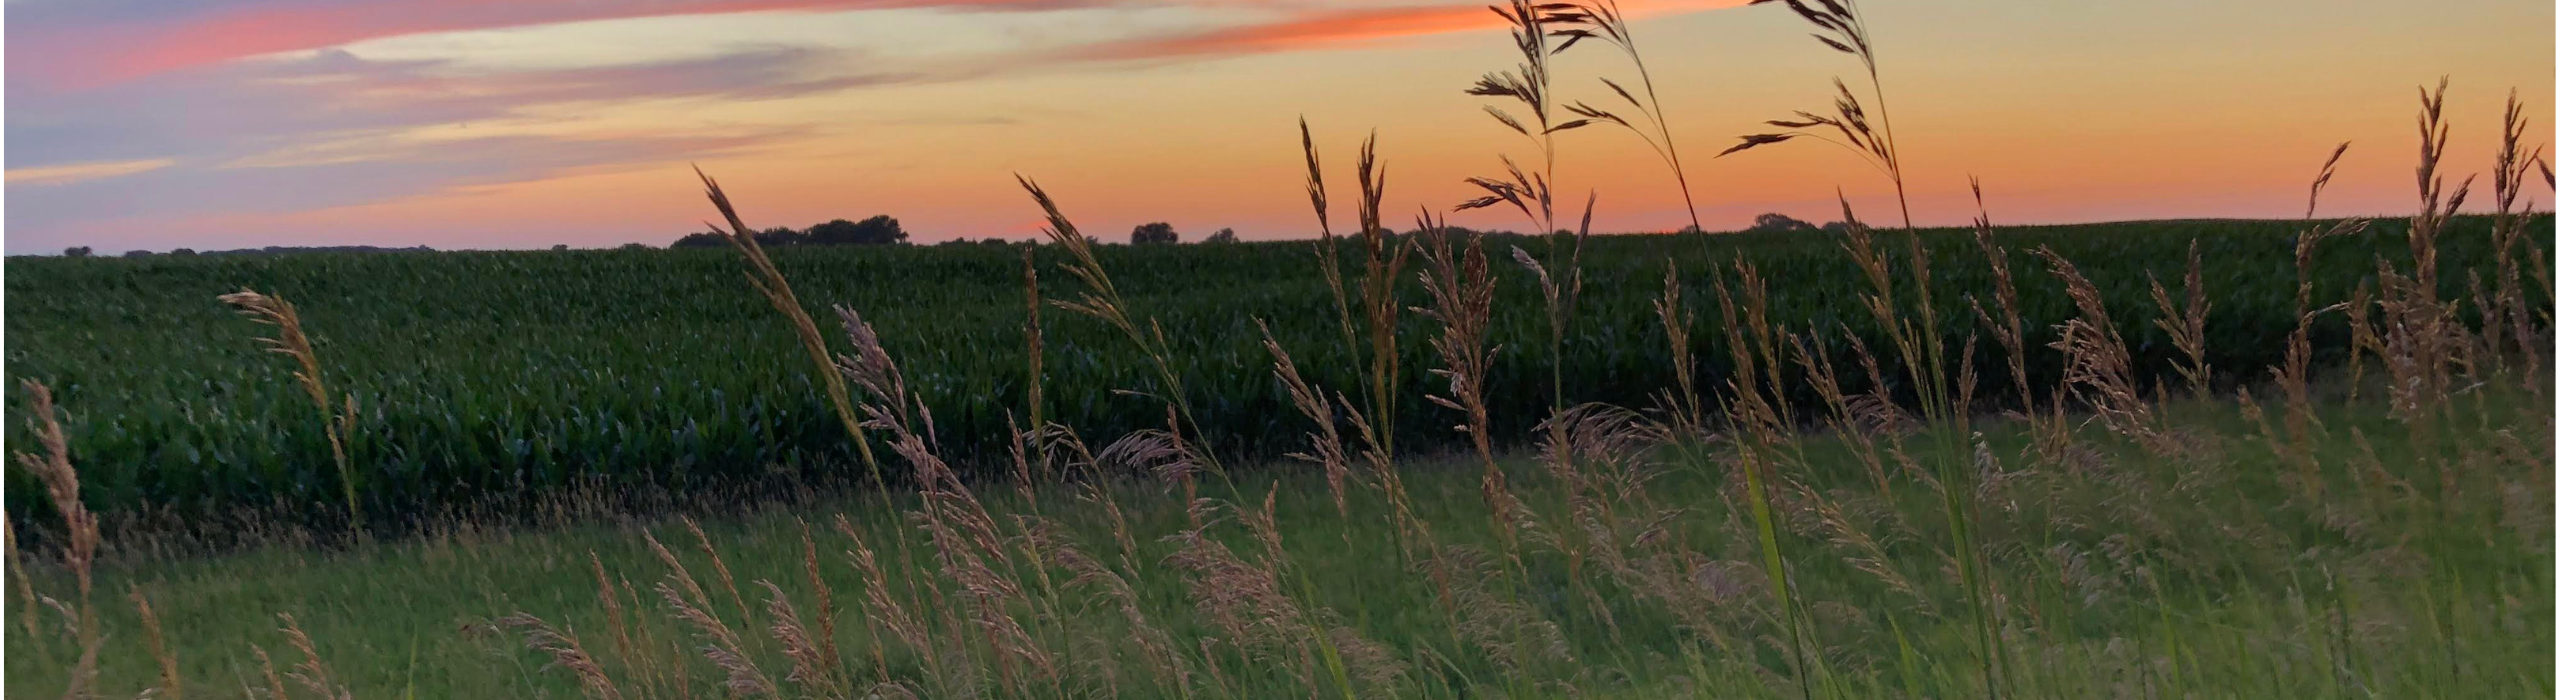 Picture of a wheat/corn field with trees far in the distance and a beautiful sunset.